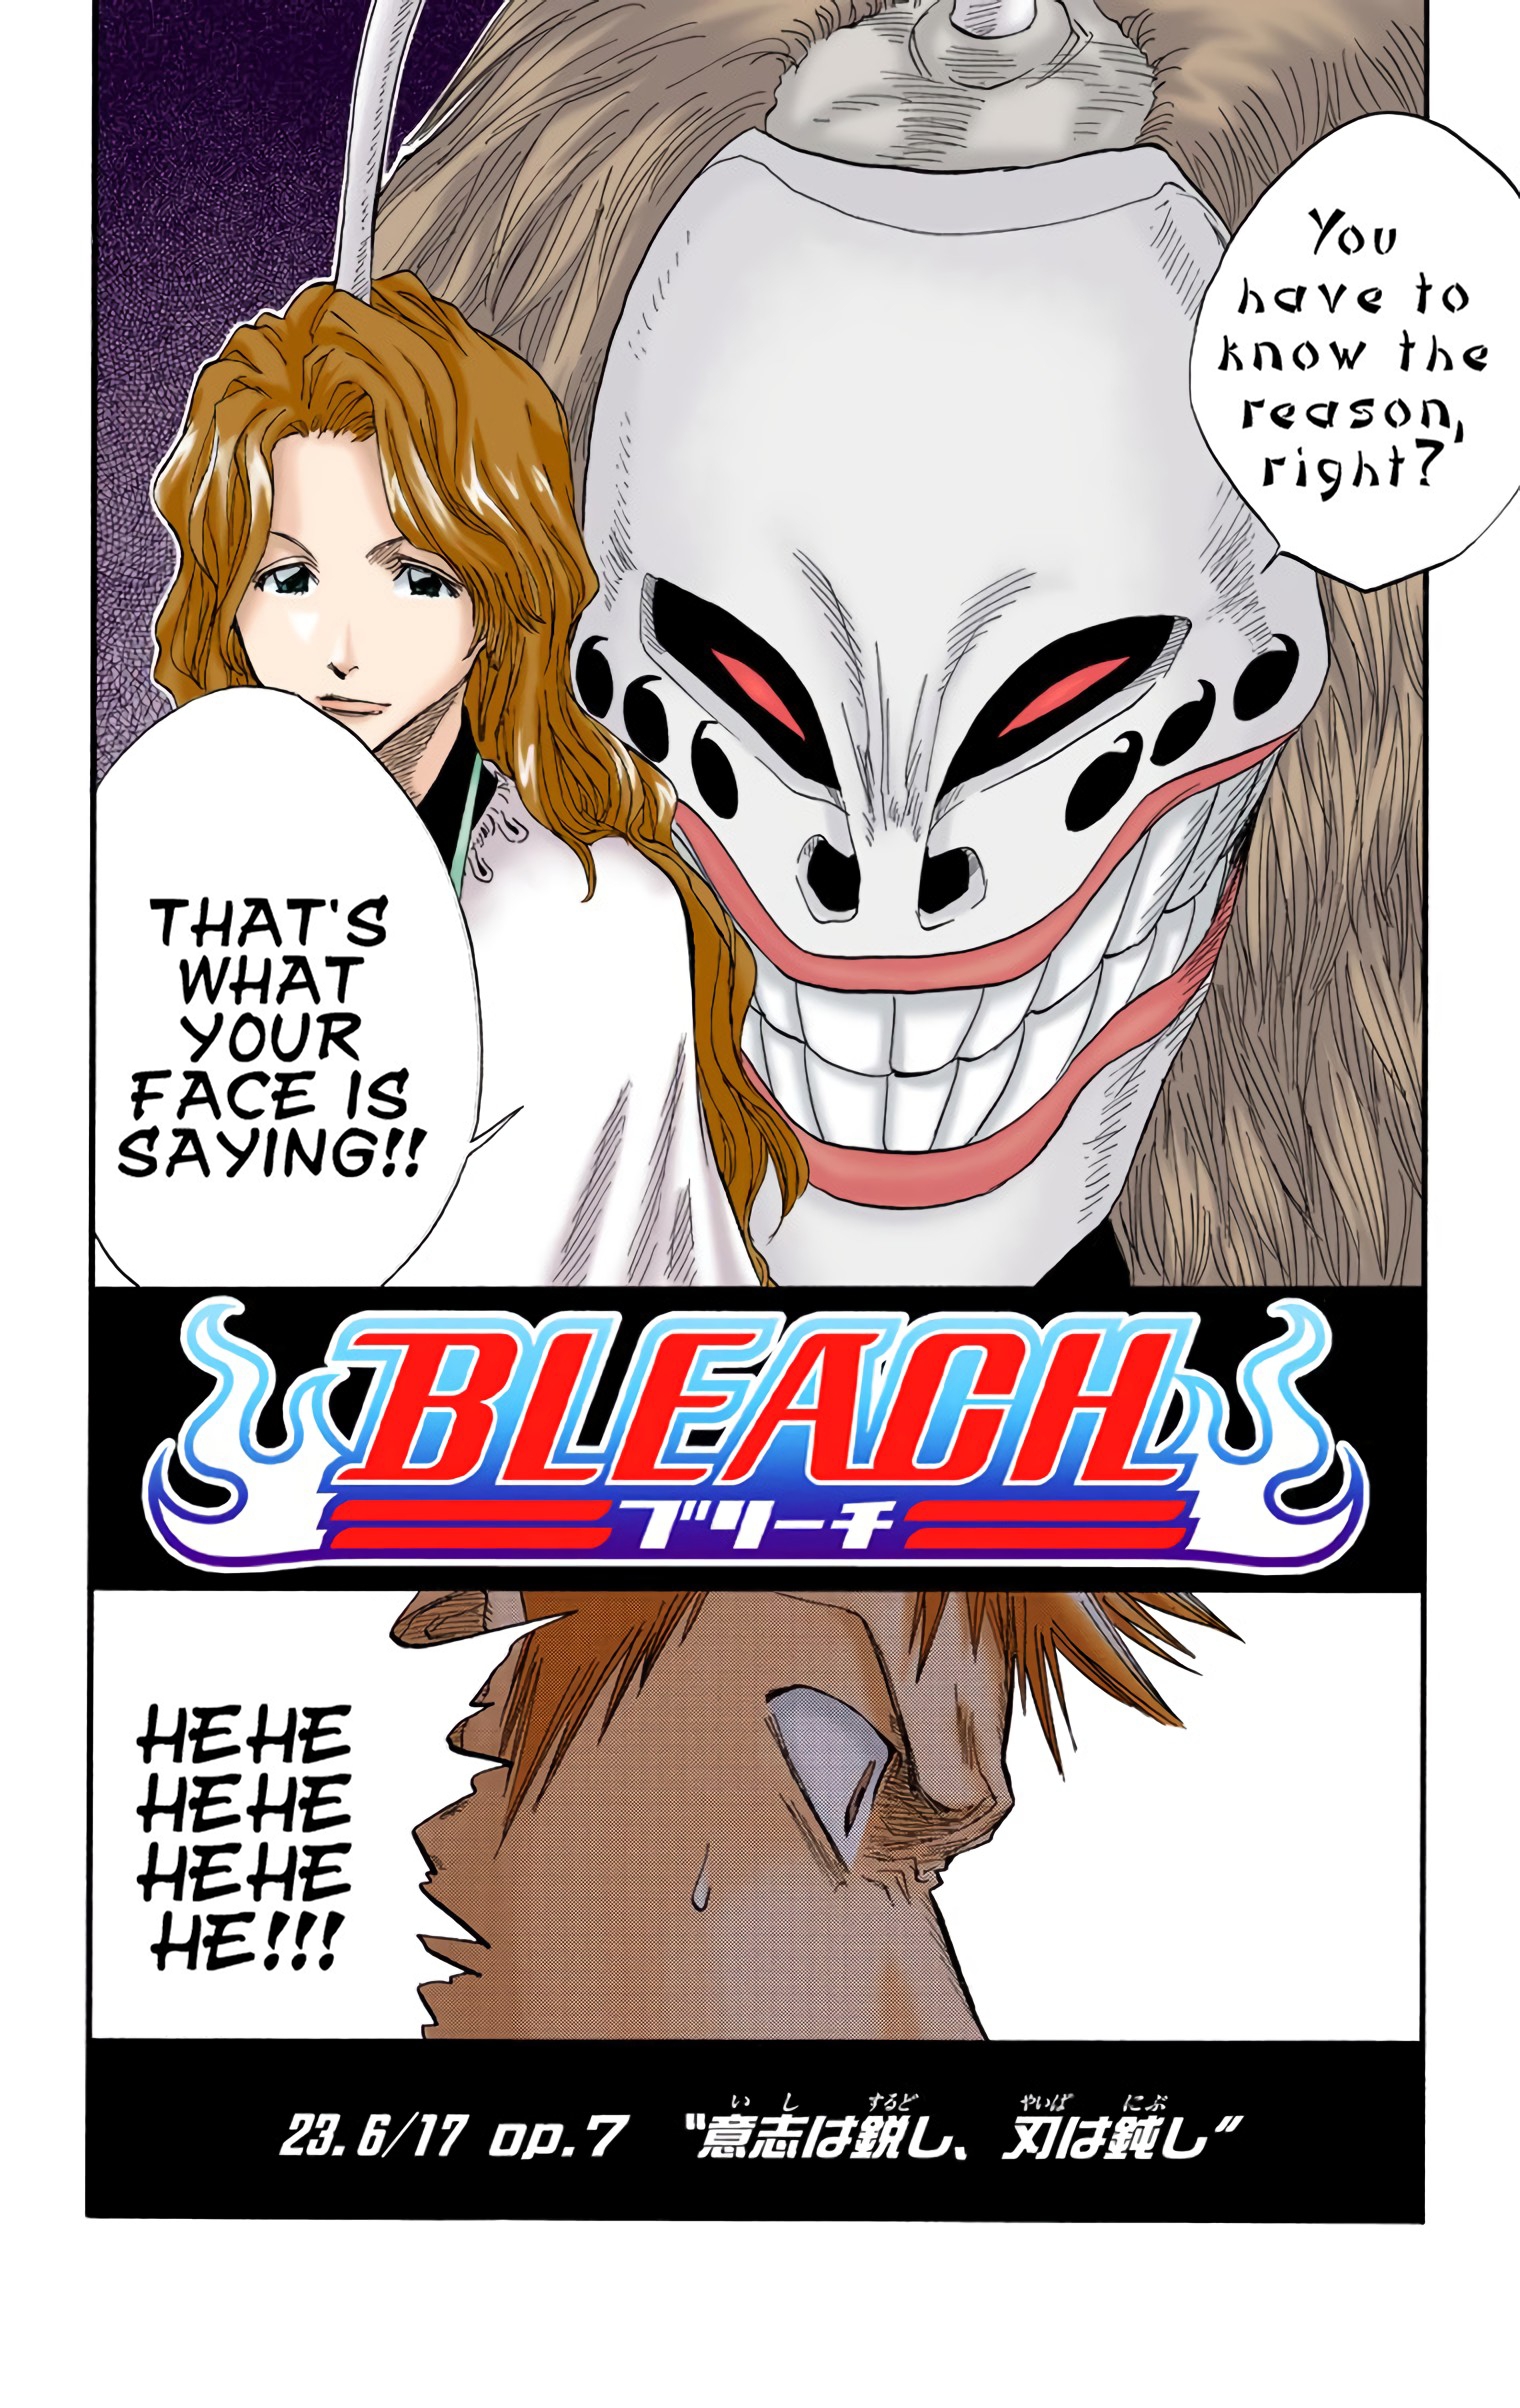 Bleach - Digital Colored Comics Vol.3 Chapter 23: 6/17 Op. 7 Sharp Will, Dull Blade - Picture 2